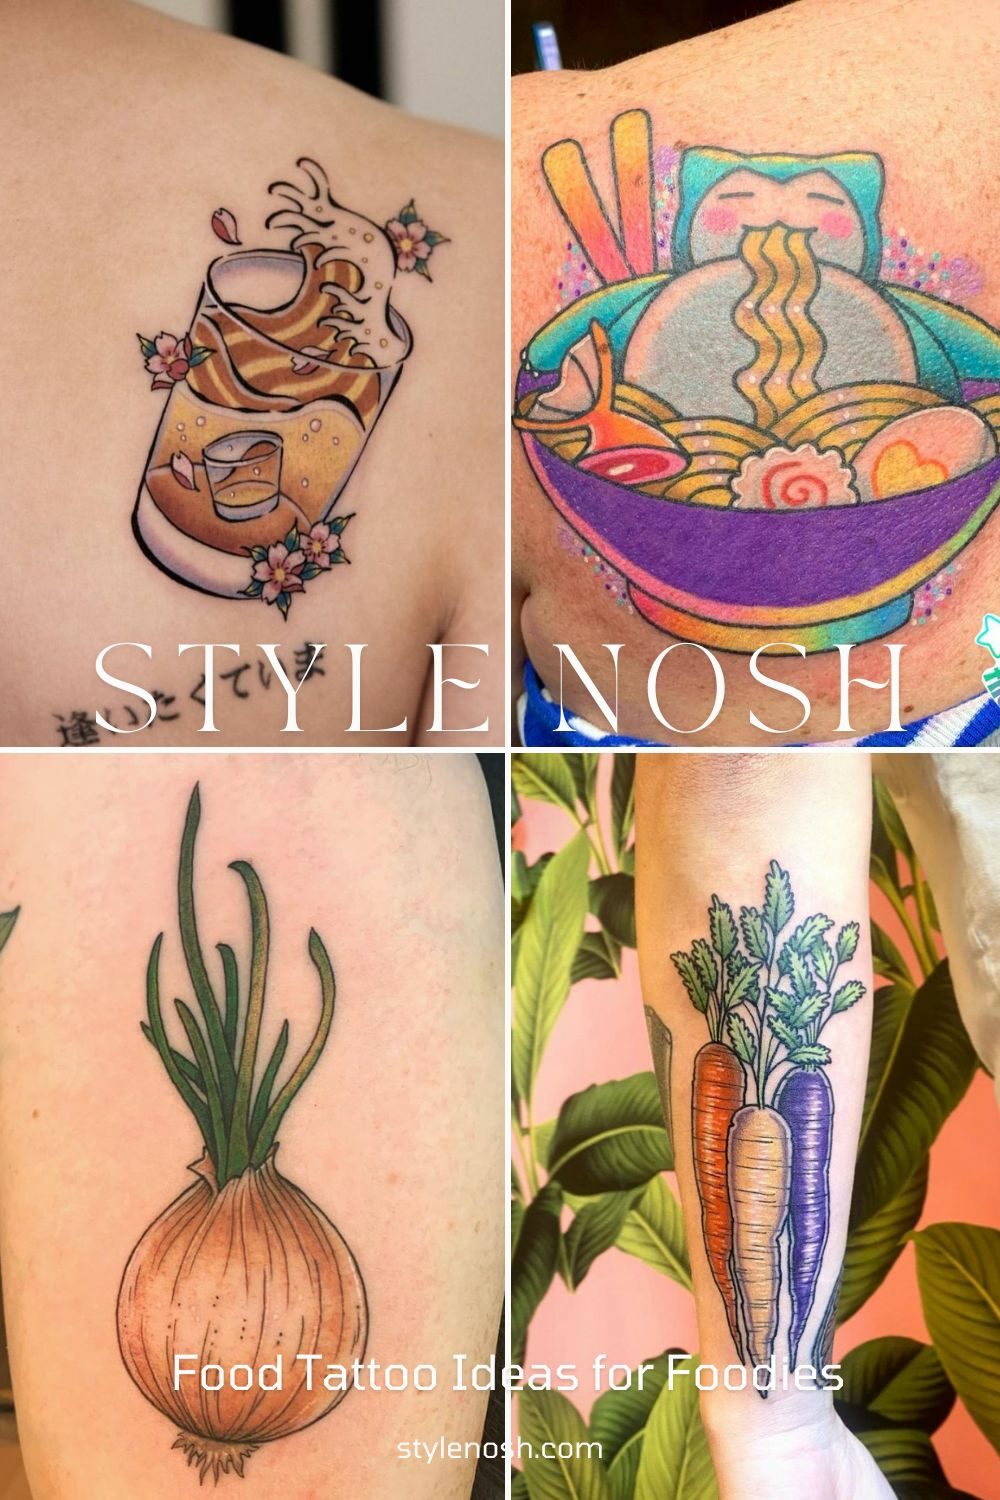 For those who want to show their appreciation for the cookware seasonings and ingredients that go into their cuisine getting a food tattoo is a great way to do it